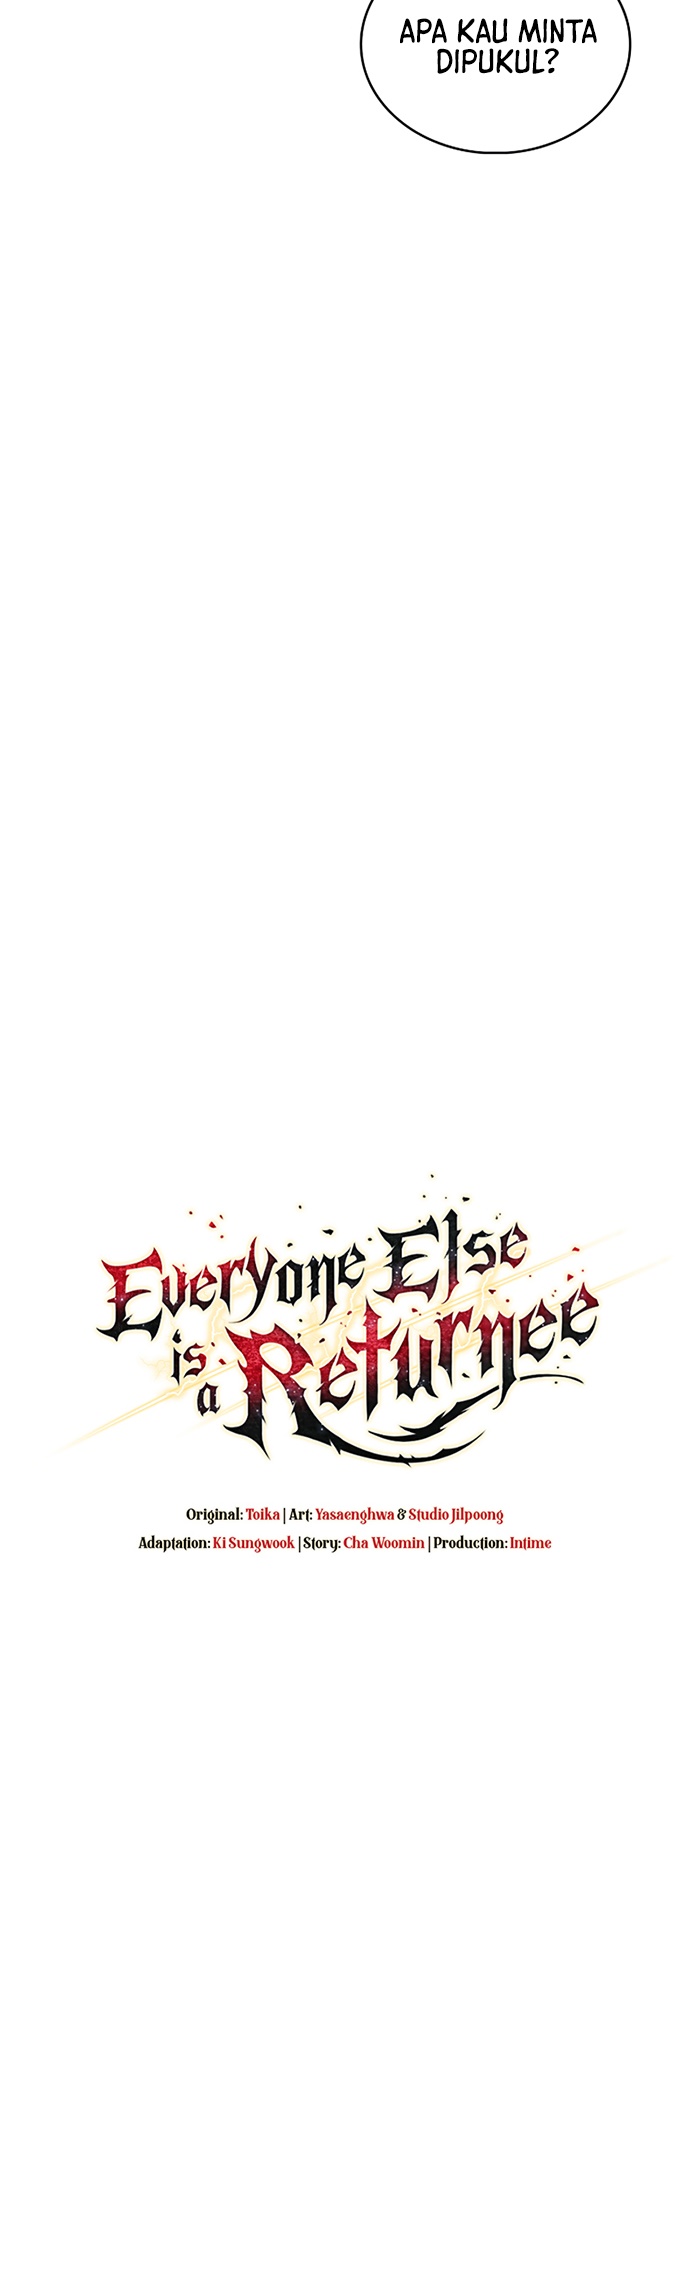 Everyone Else Is A Returnee Chapter 31